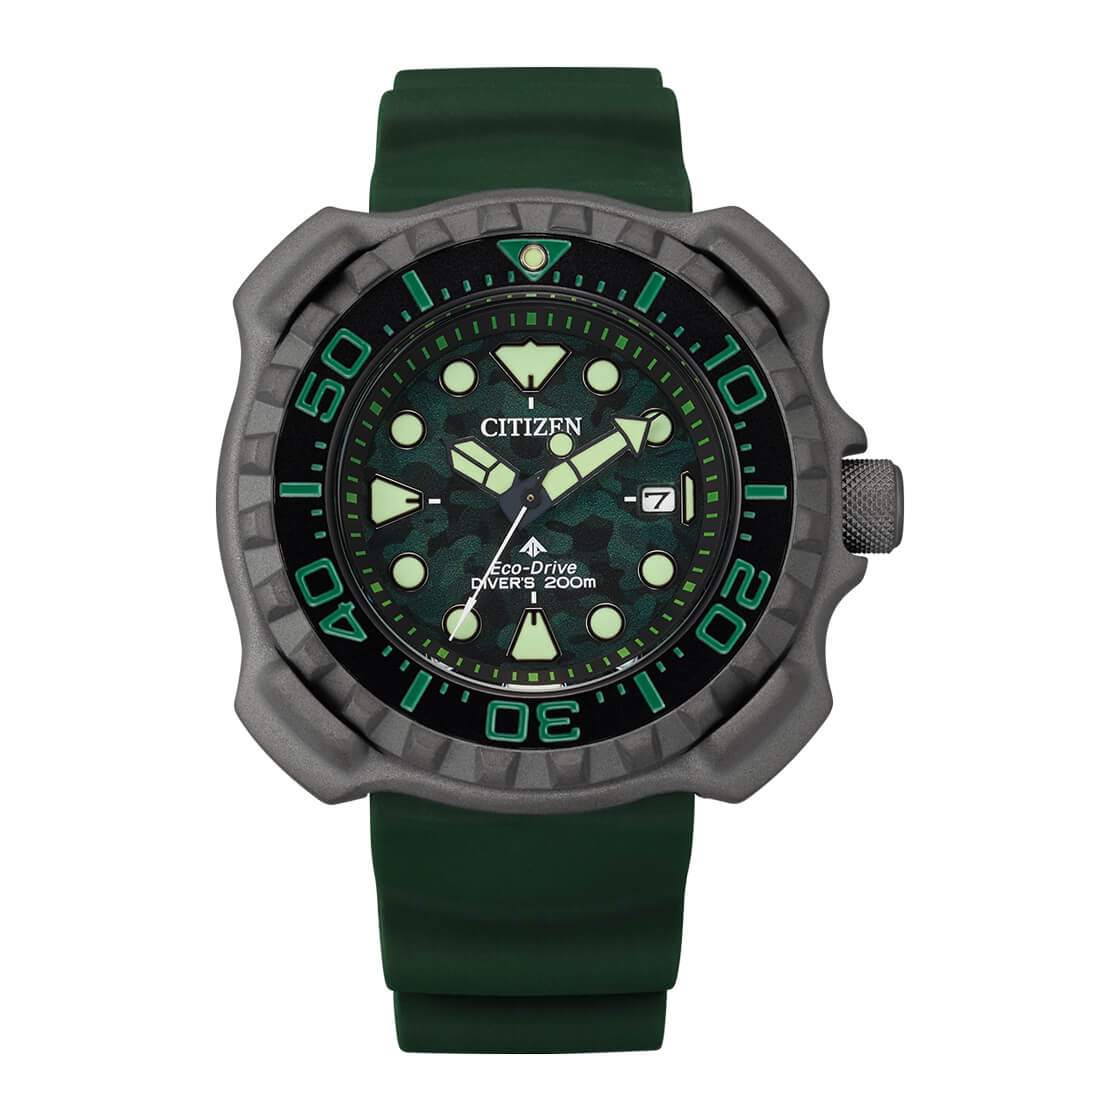 Citizen Men's Watch with Light Powered Movement and Green Dial - BN0228-06W